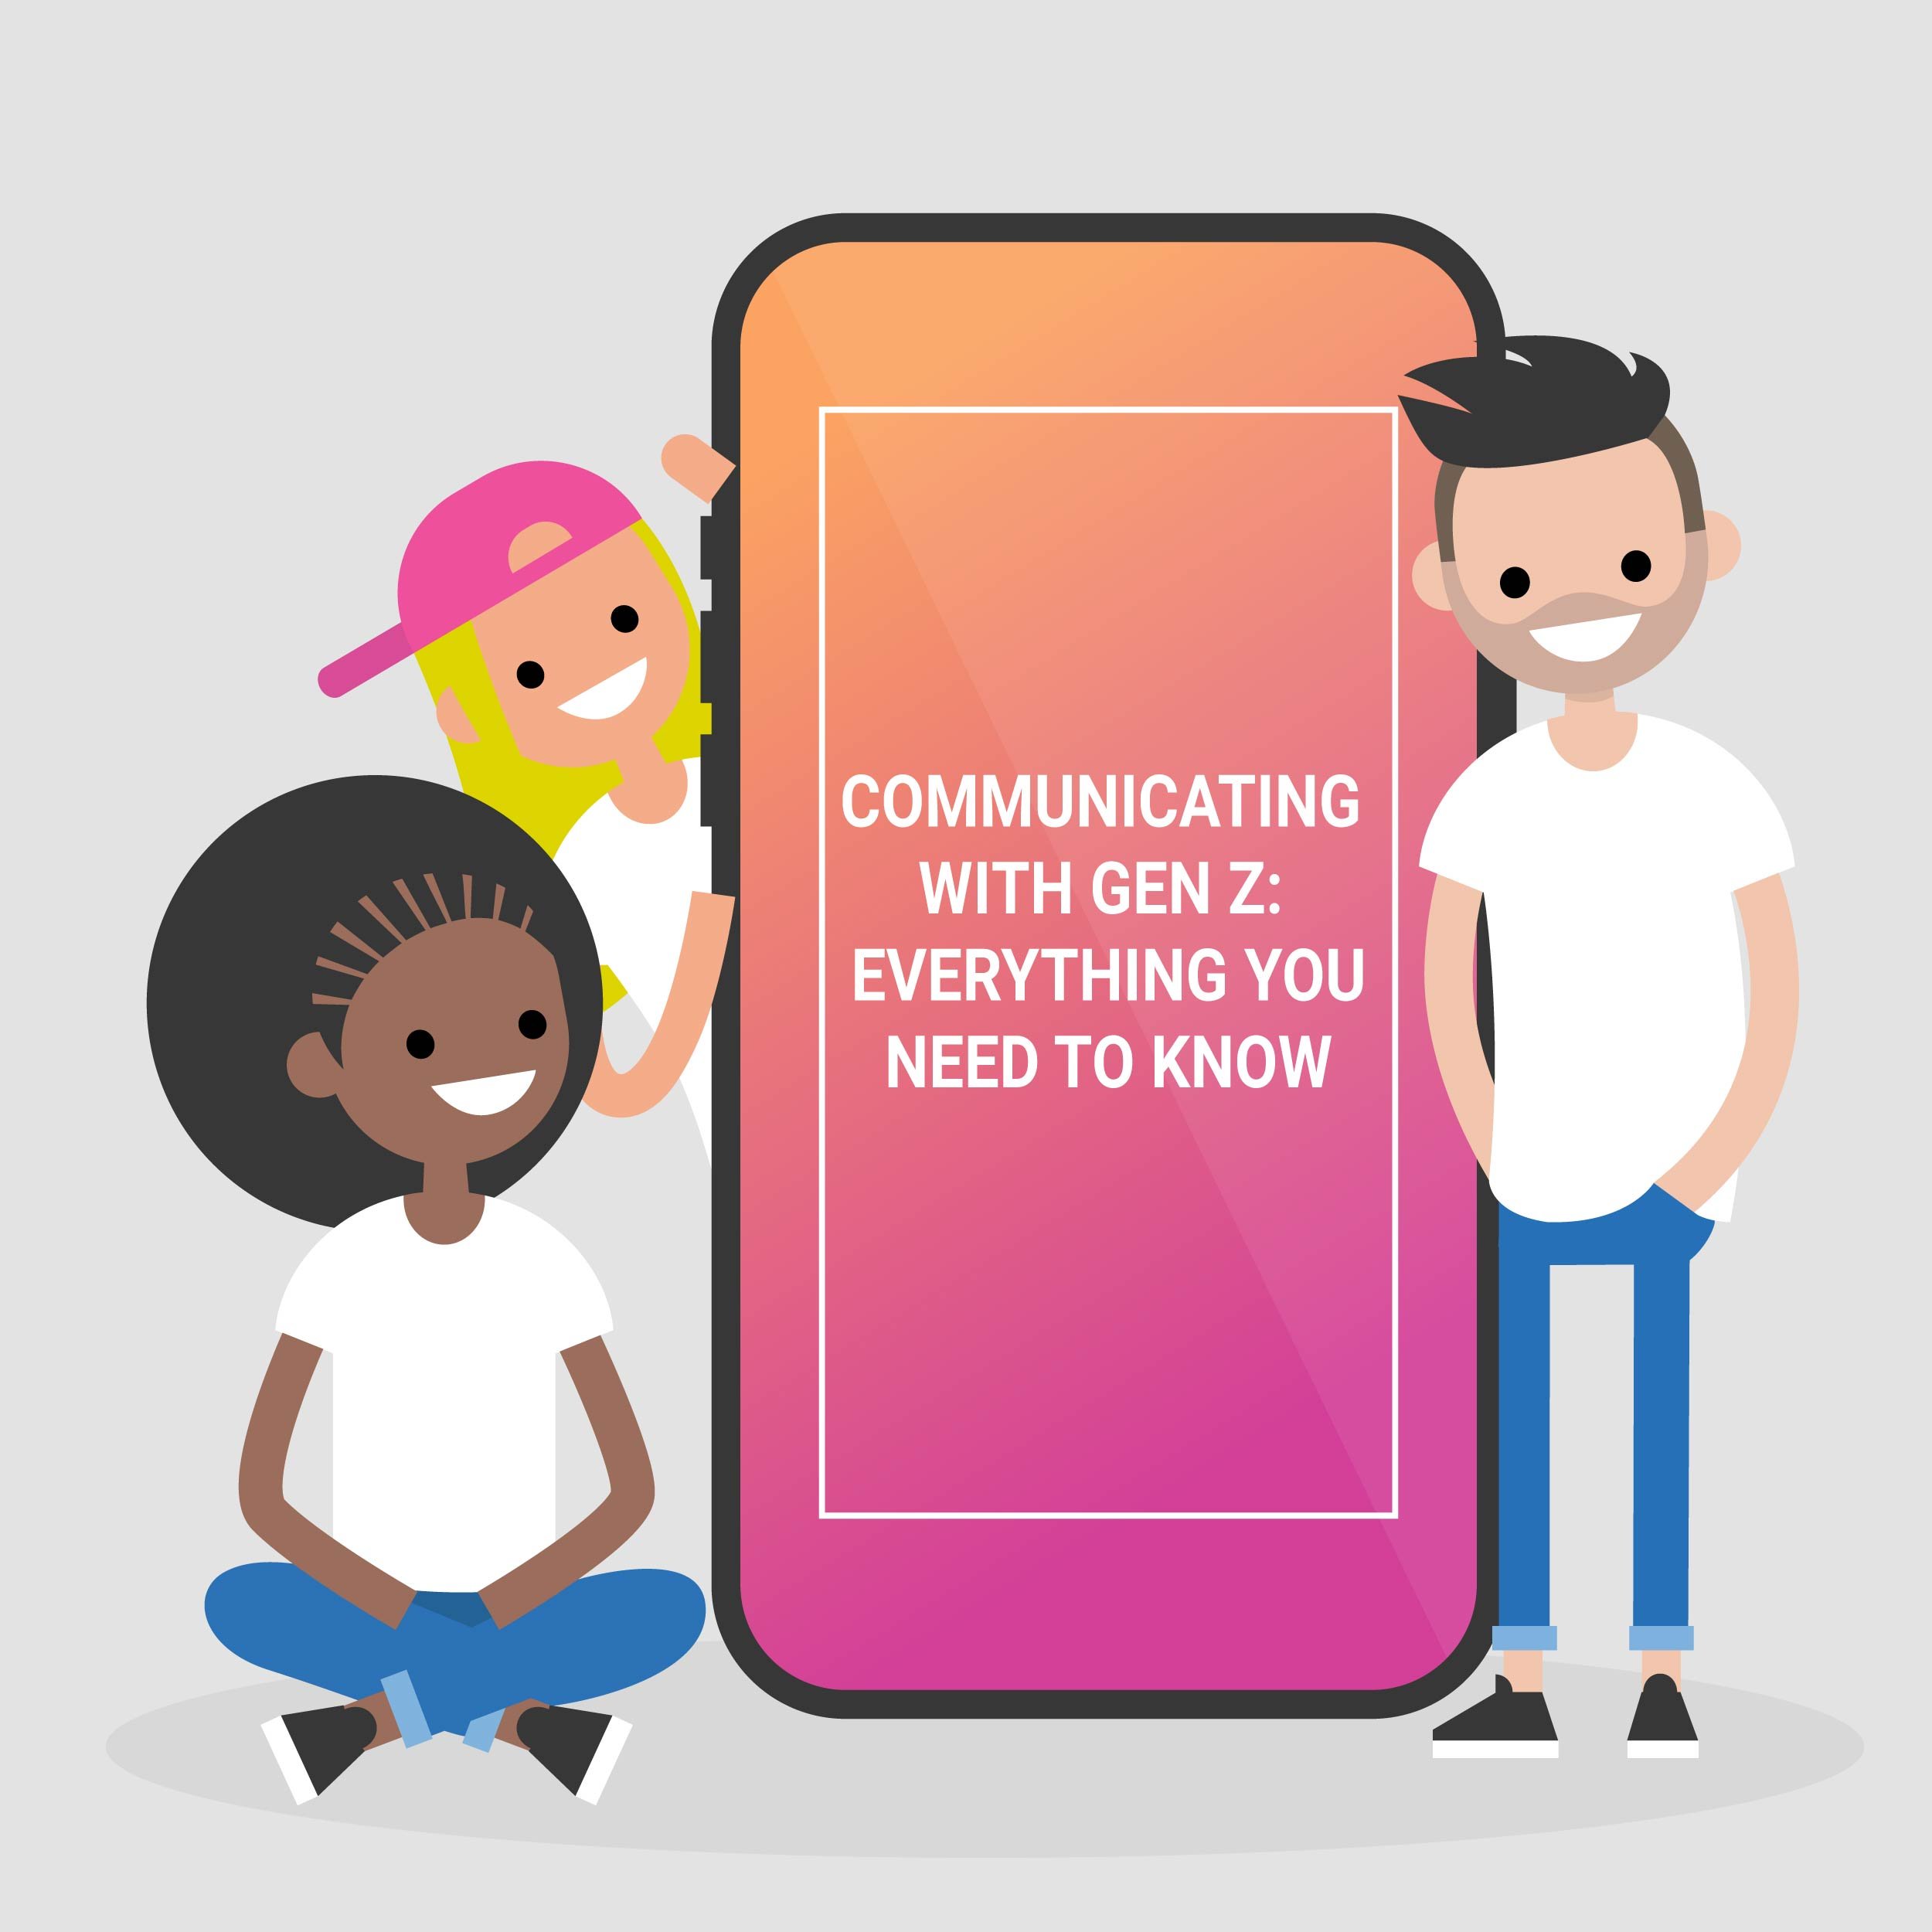 Communicating with Generation Z: Everything You Need to Know